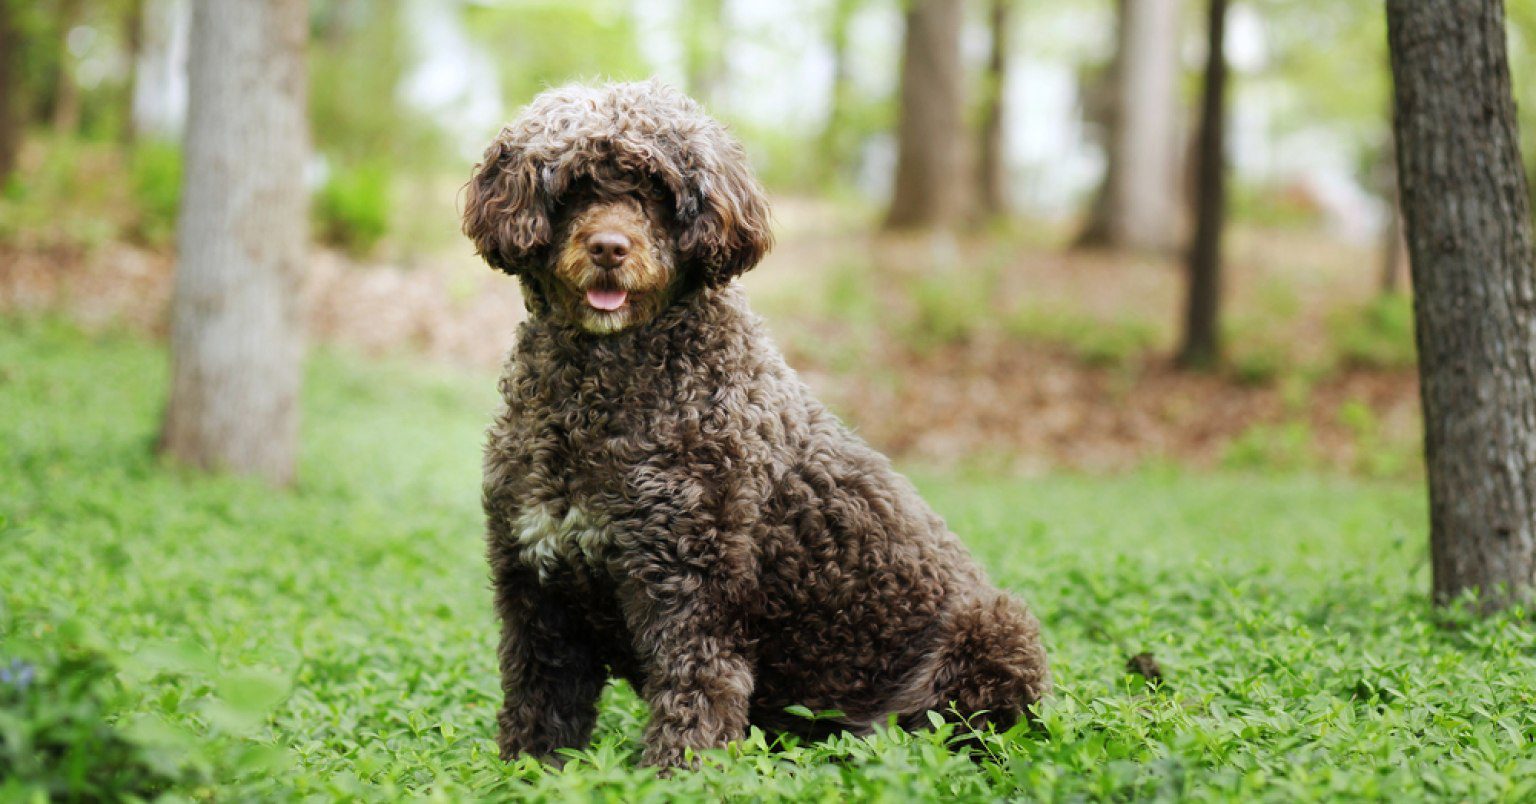 Photograph of a Portuguese Water Dog in the woods